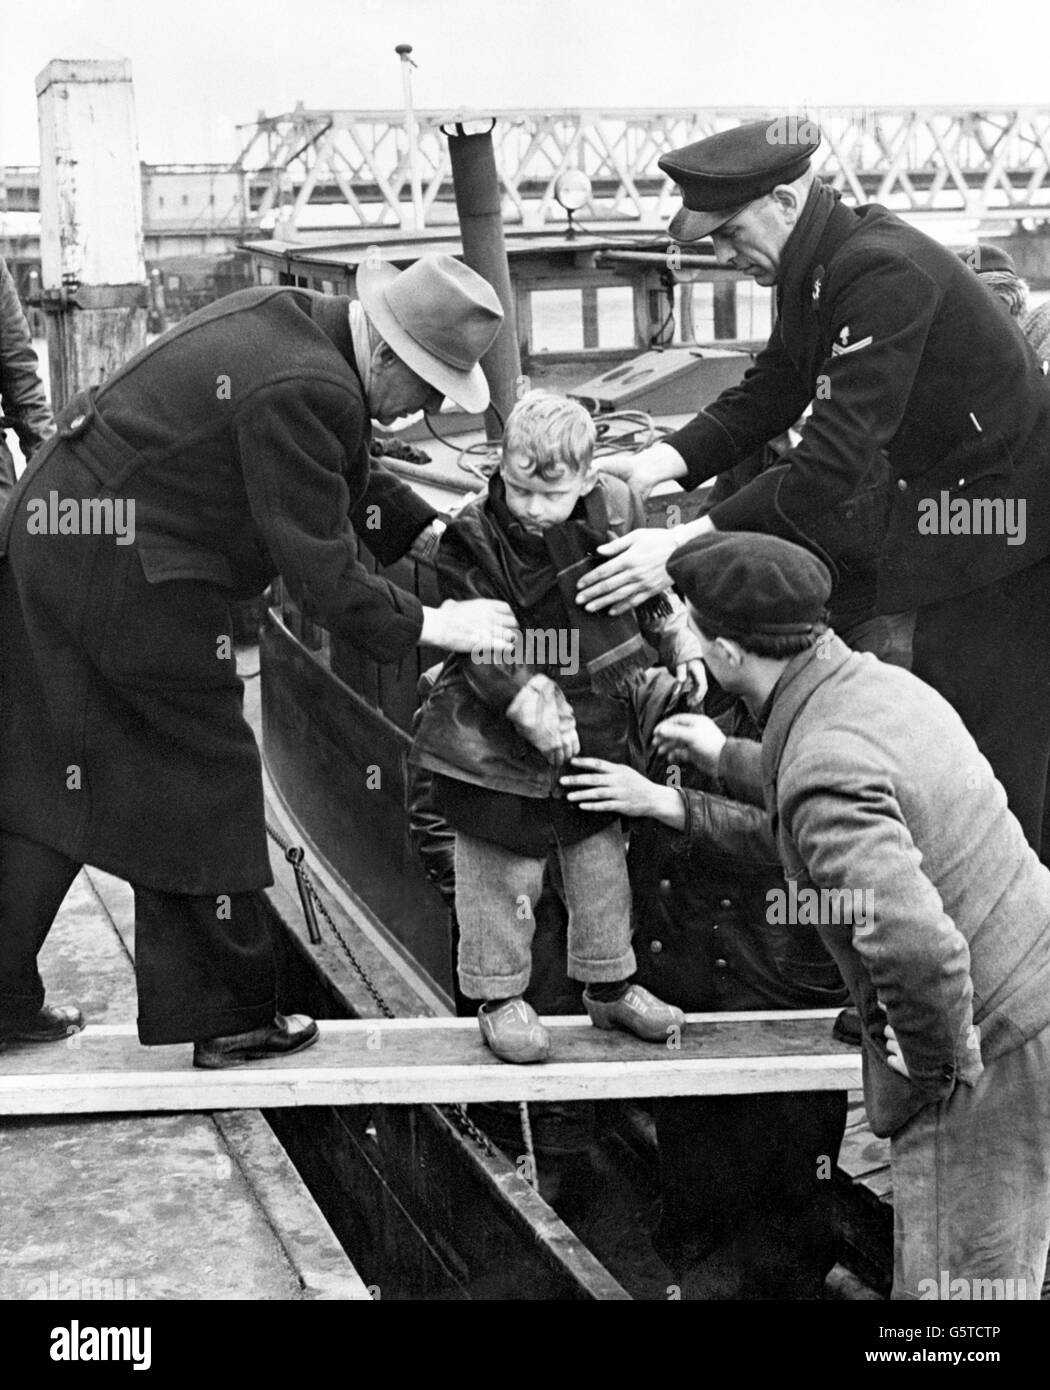 Environment - A boy is rescued from flood waters - Dordrecht - Holland Stock Photo